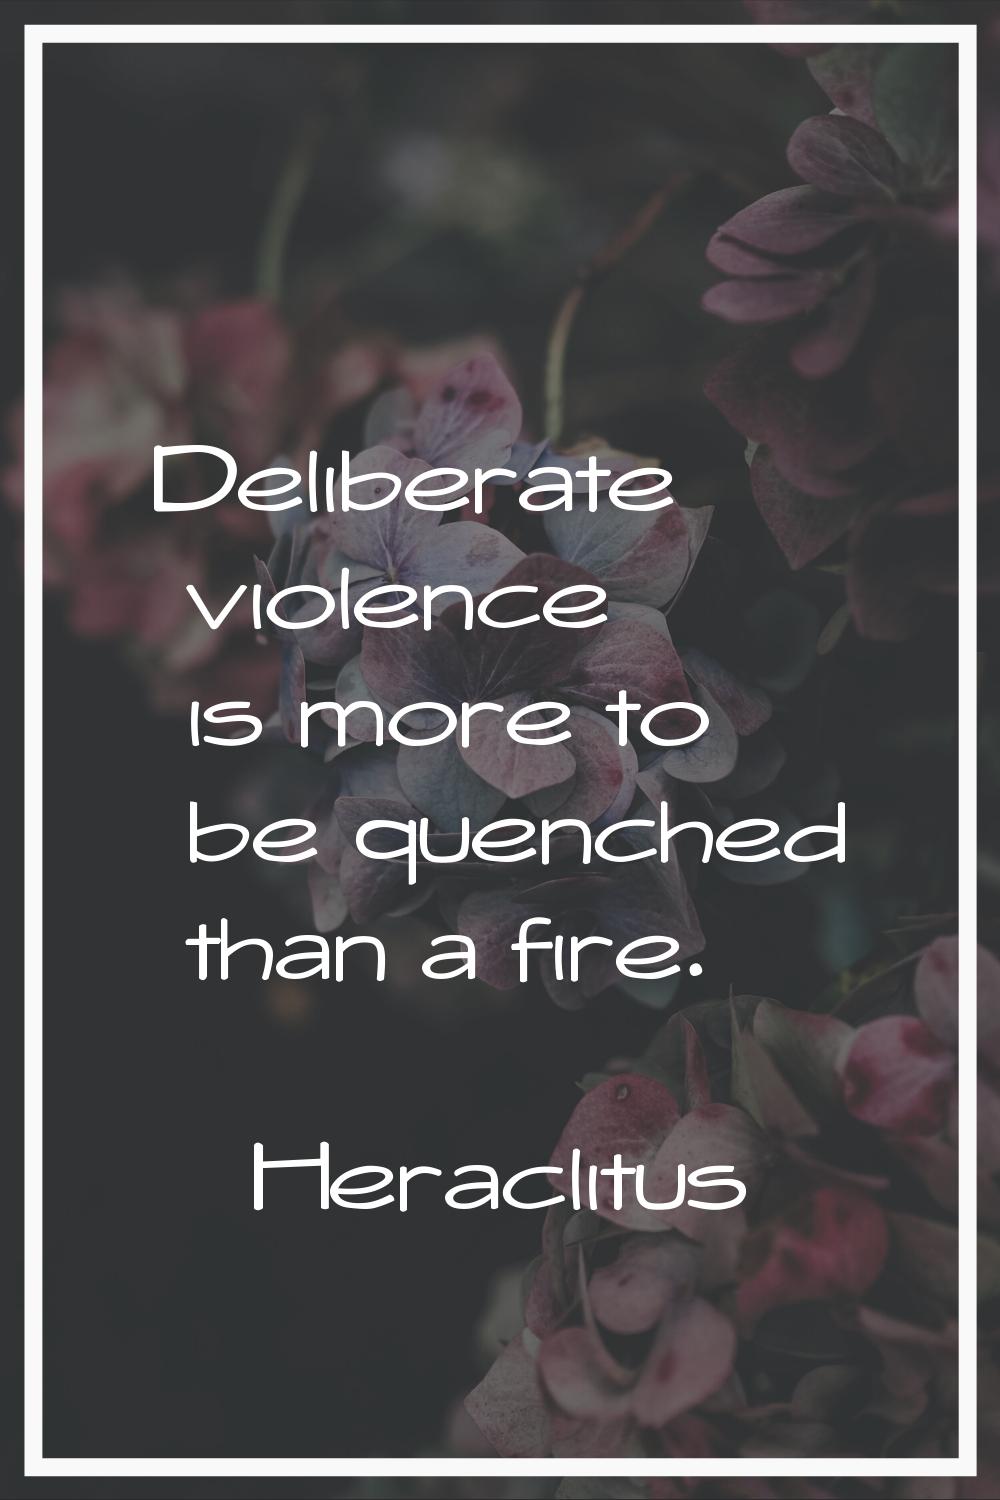 Deliberate violence is more to be quenched than a fire.